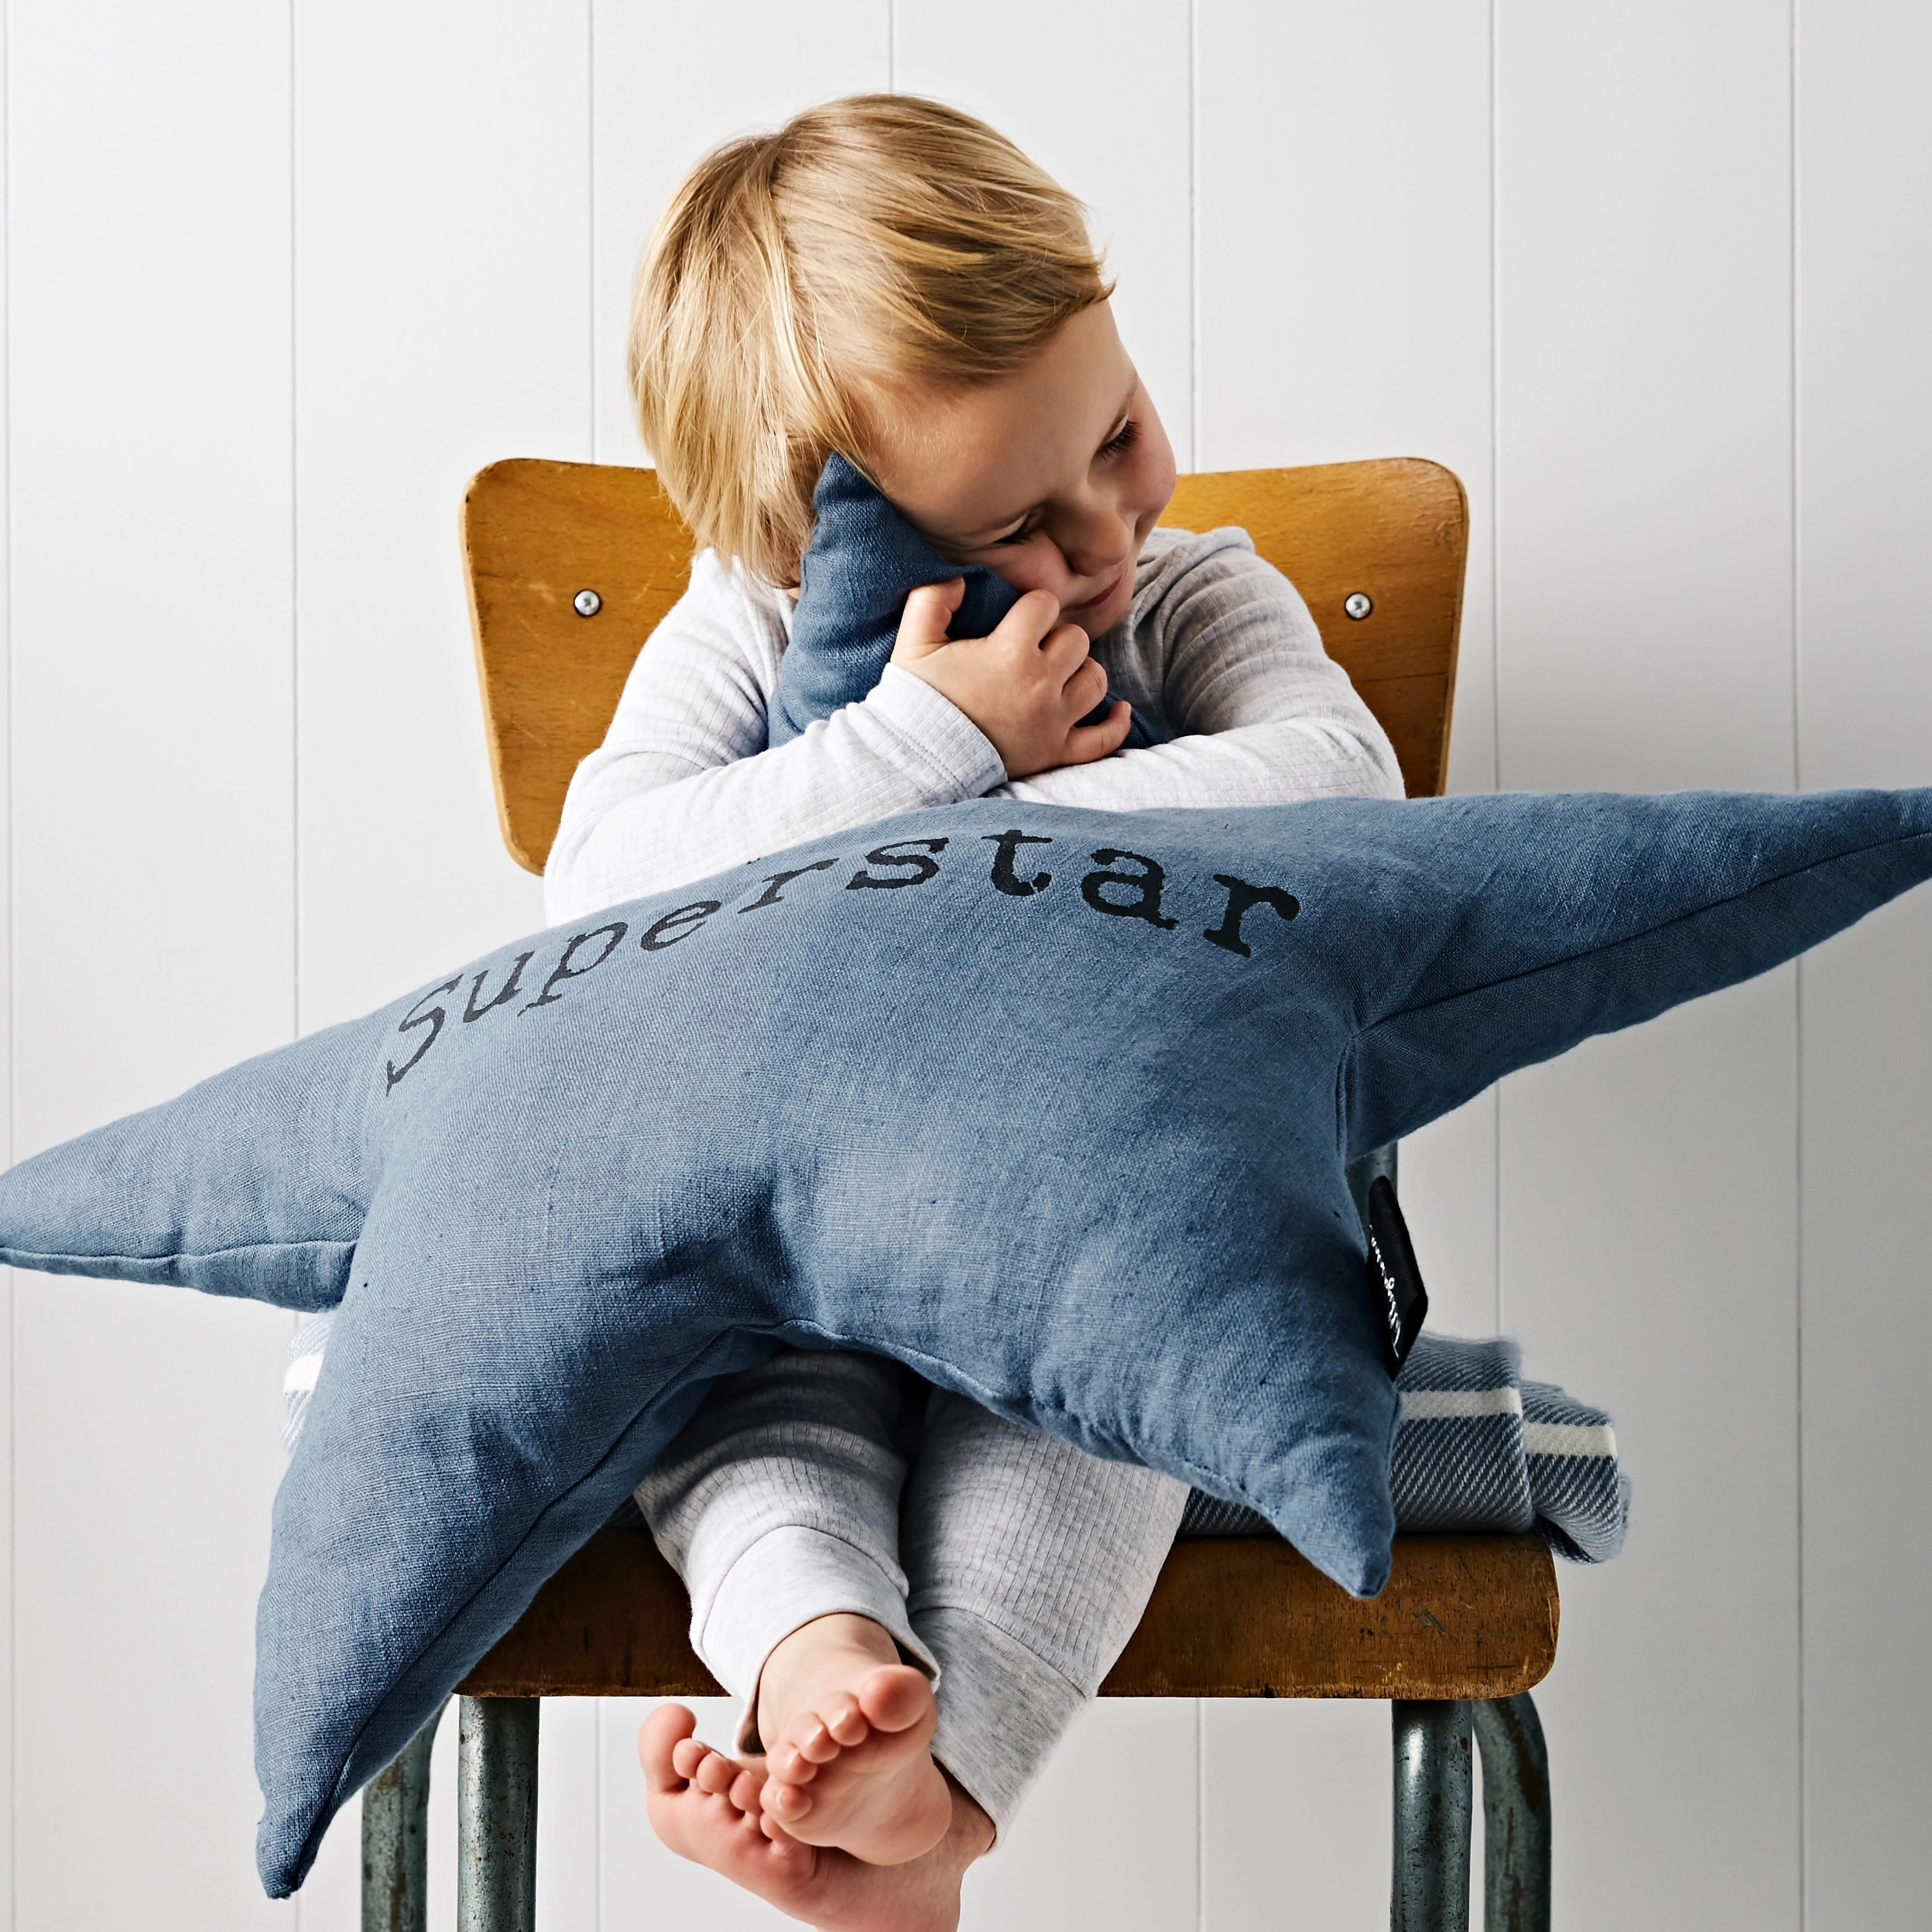 Child hugging large star shaped cushion with the text 'superstar' printed